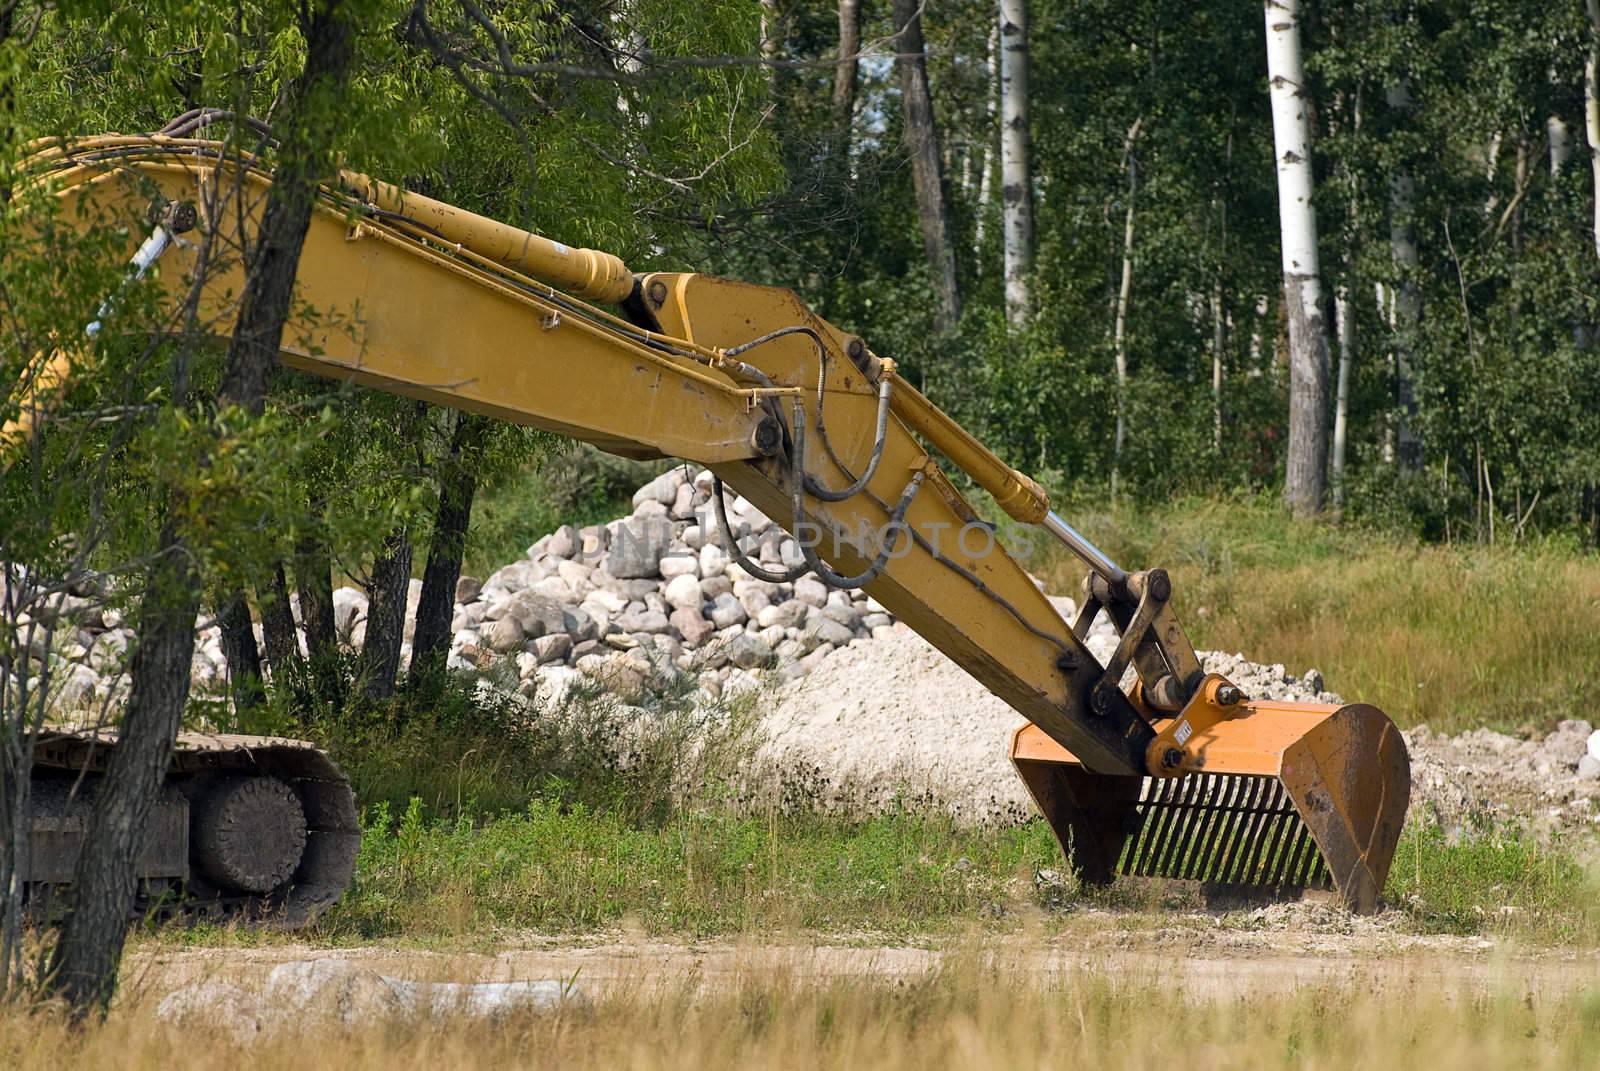 An excavator shovel with a pile of stones behind